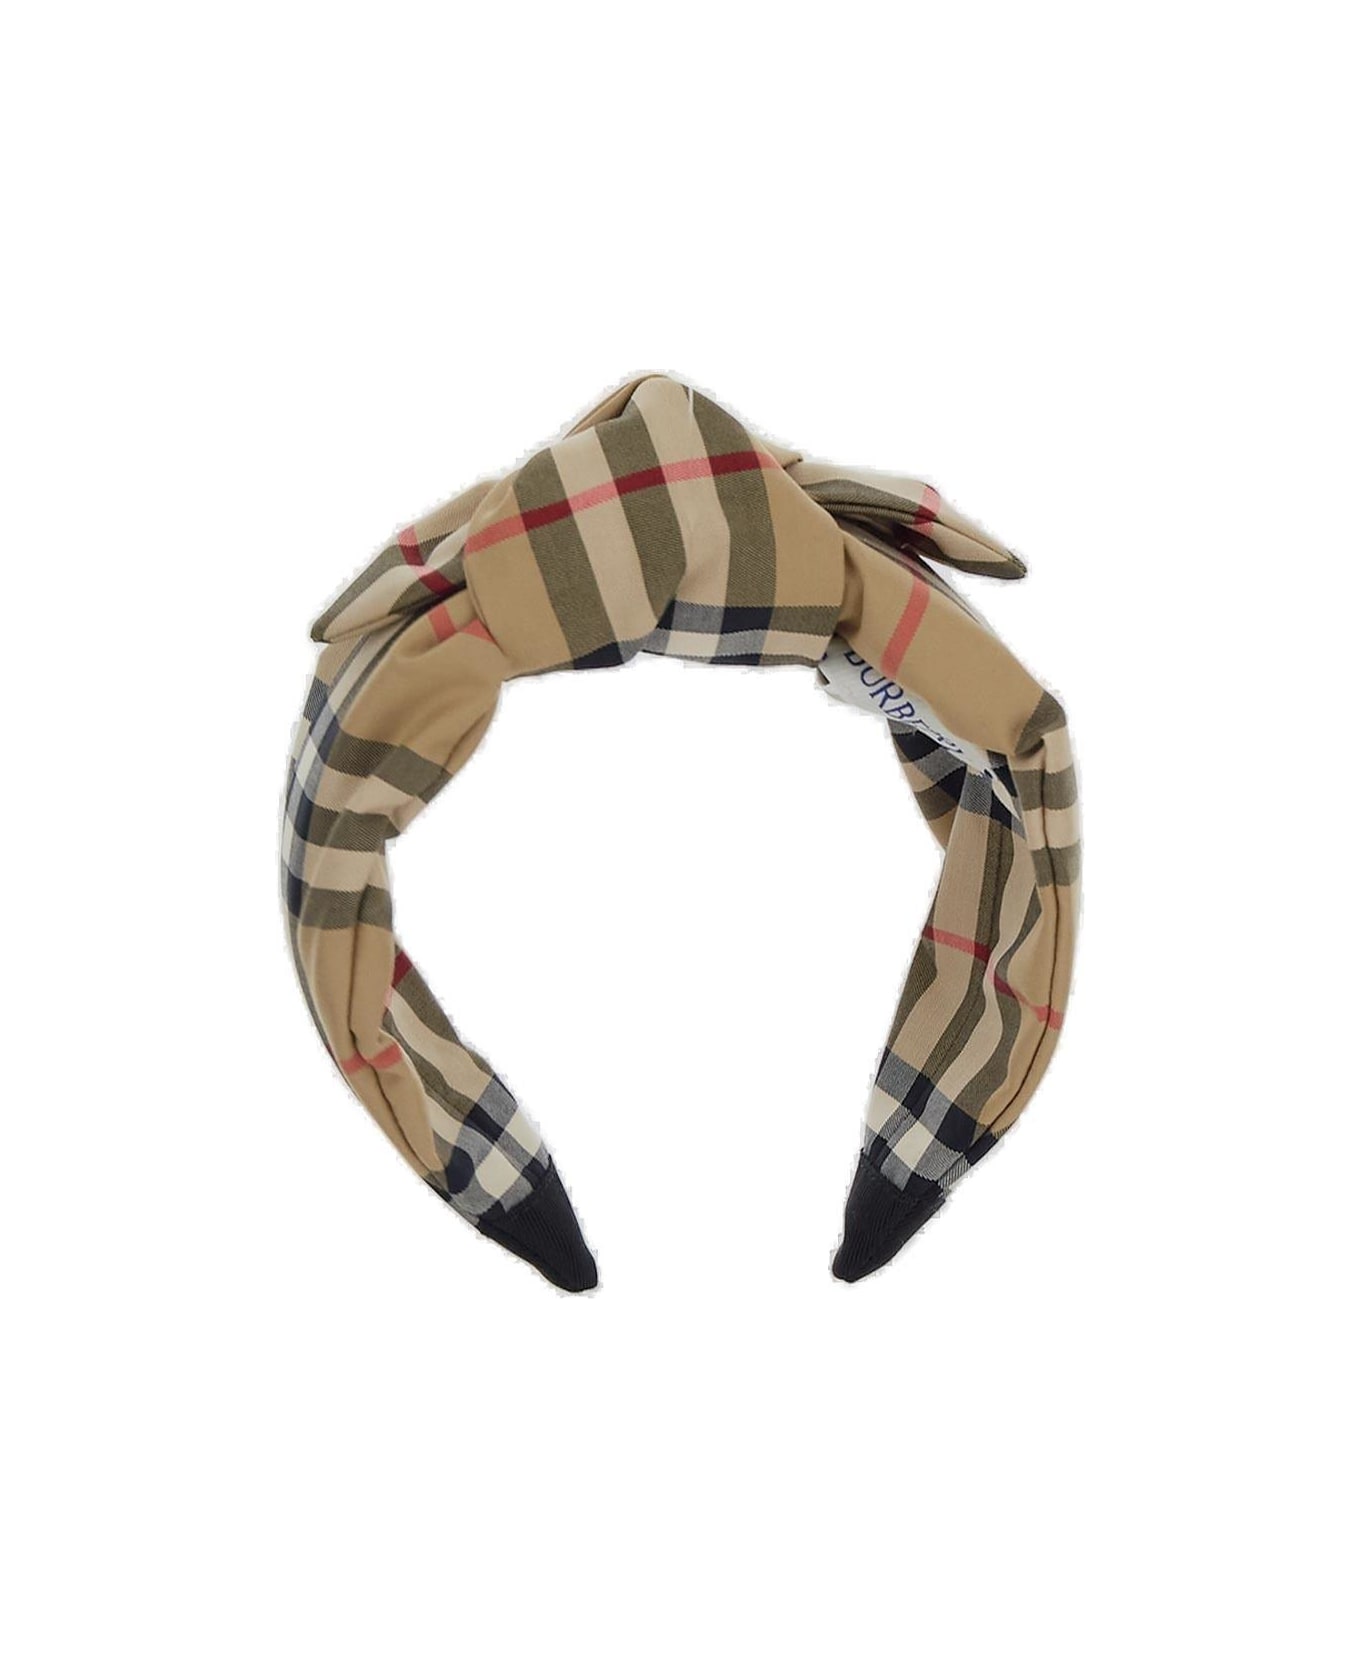 Burberry Checked Knot-detailed Headband - Archive beige